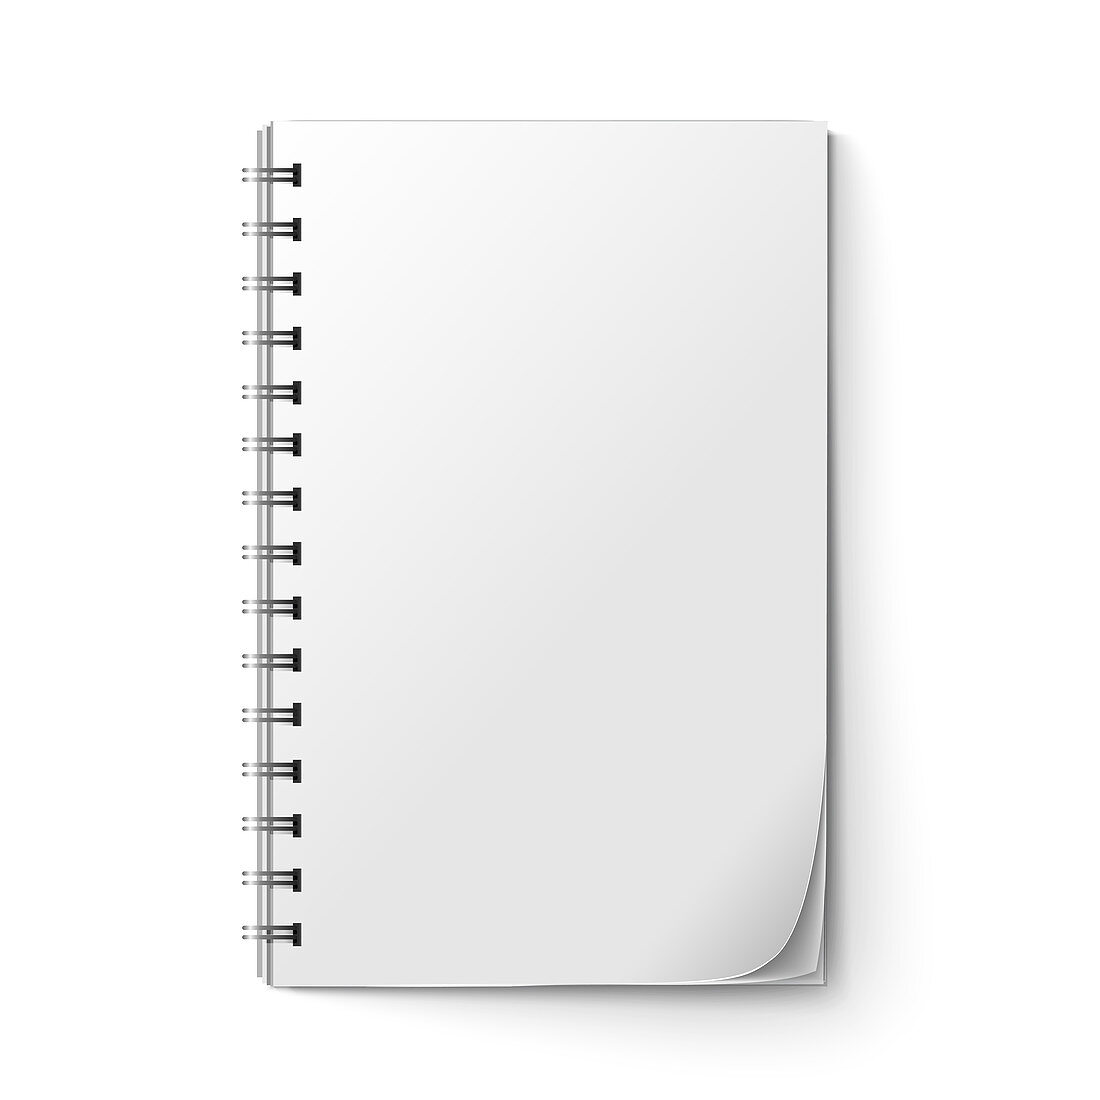 Blank notepad page, illustration